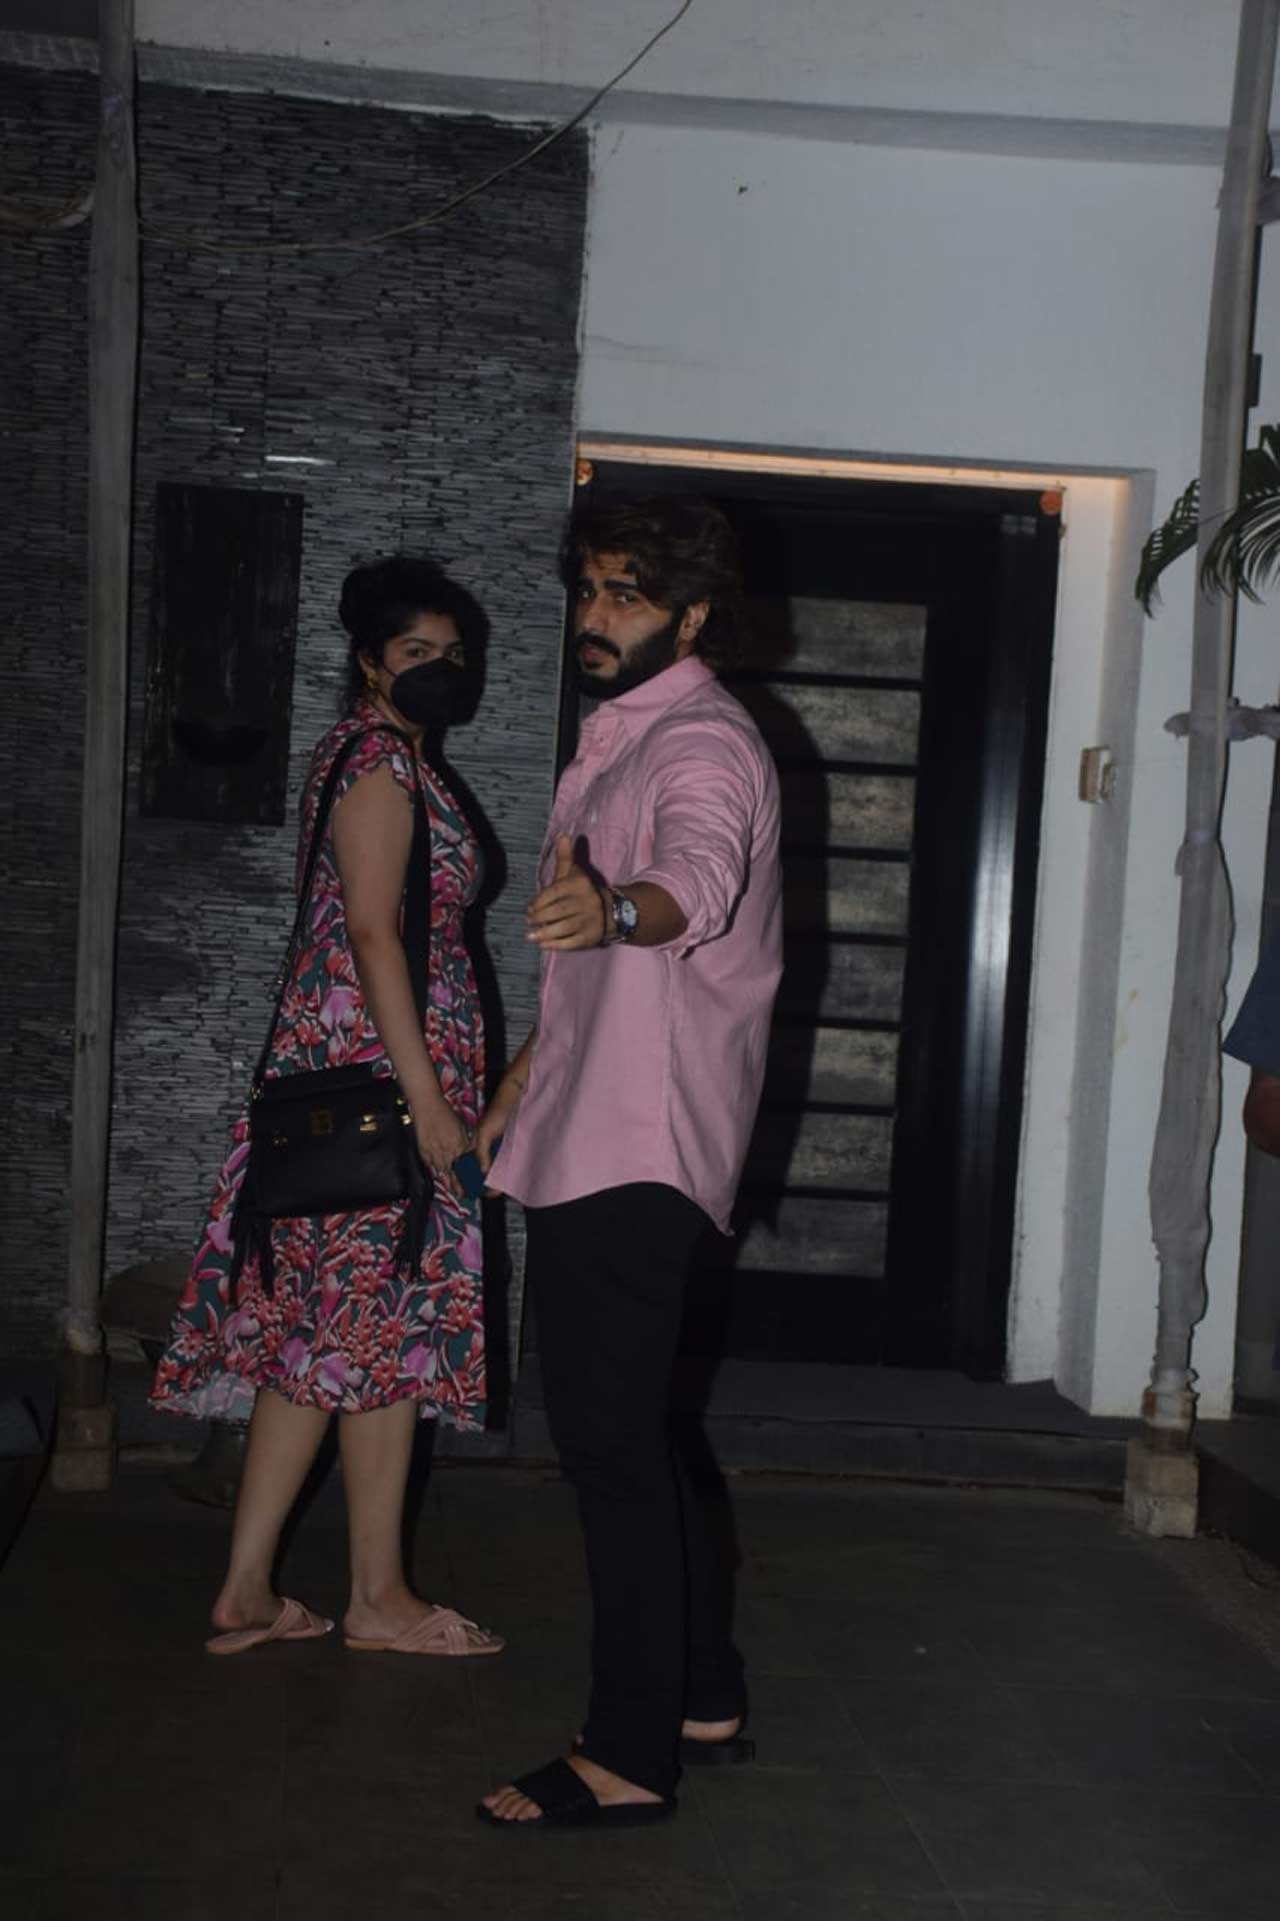 Anshula Kapoor and brother Arjun Kapoor were twinning in pink outfits. While Arjun opted for a plain shirt, Anshula's floral dress was truly a winning choice for summer fashion.